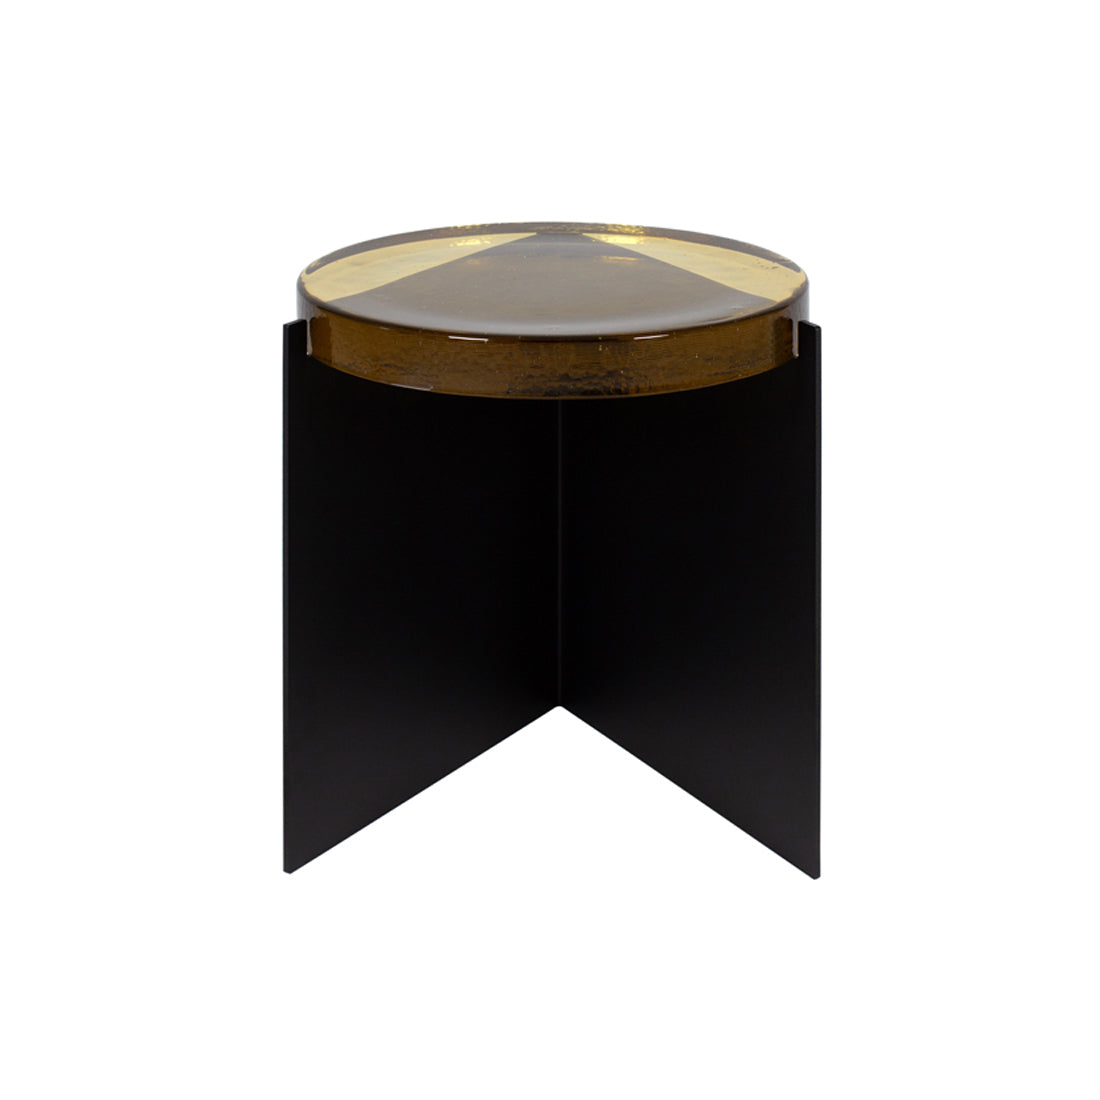 Alwa One Side Table: One - 15